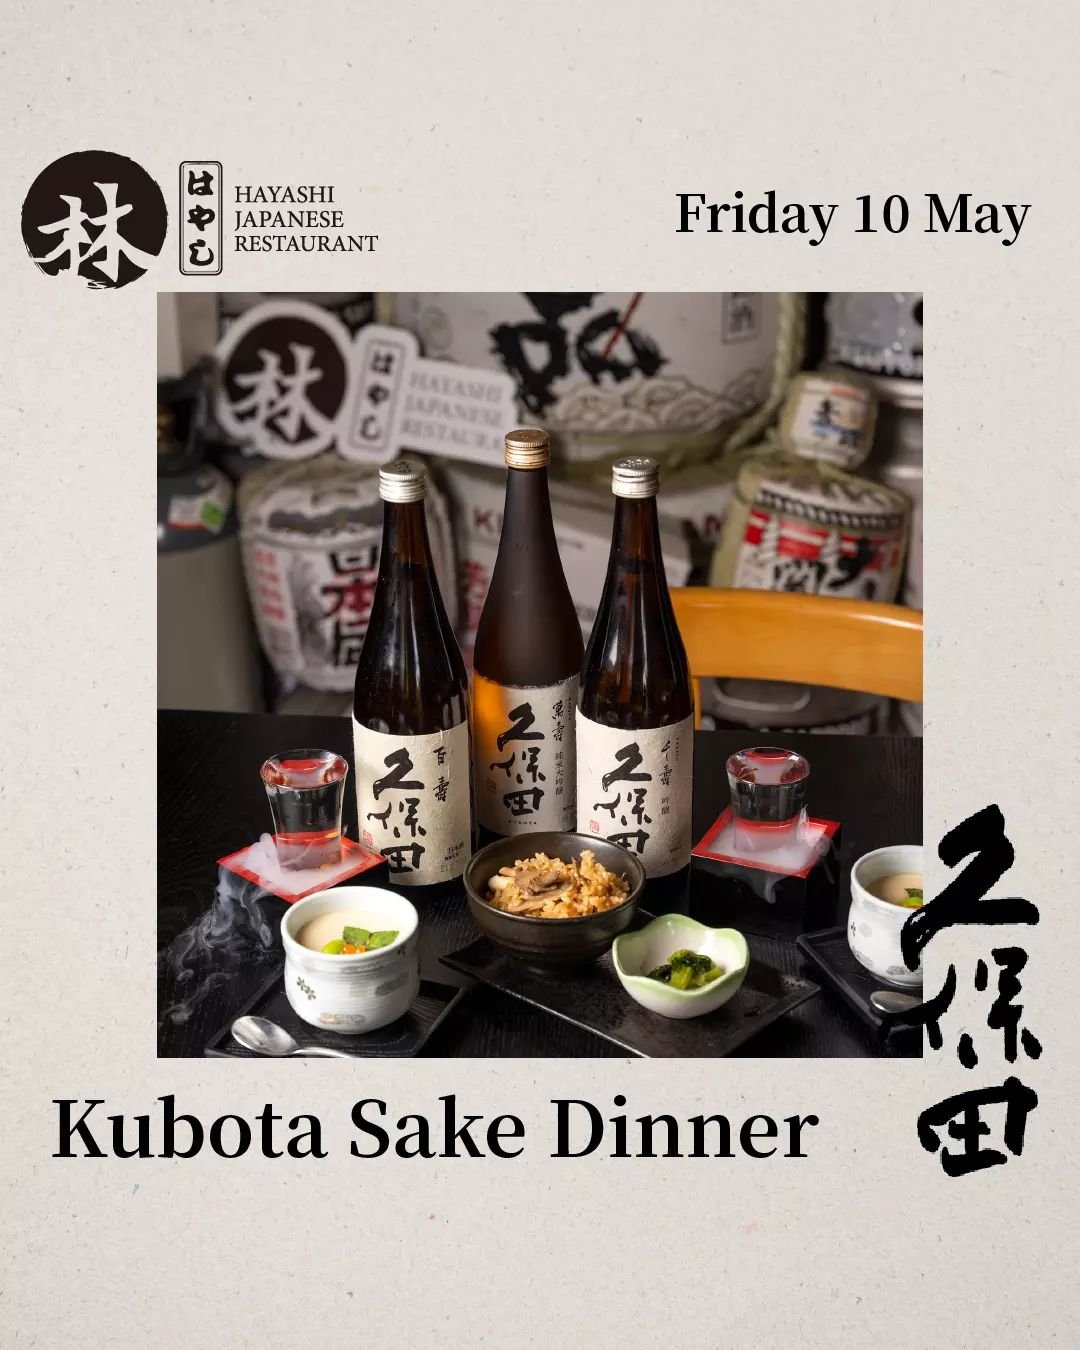 KUBOTA SAKE DINNER&nbsp;🍶 

A very special guest is joining us from Japan to take you on a sake journey like no other!

Hayashi welcomes Yoshikazu Endo of Asahi-Shuzo Sake Brewing Co&rsquo;s for one night only. Chef Hashi has prepared an incredible 